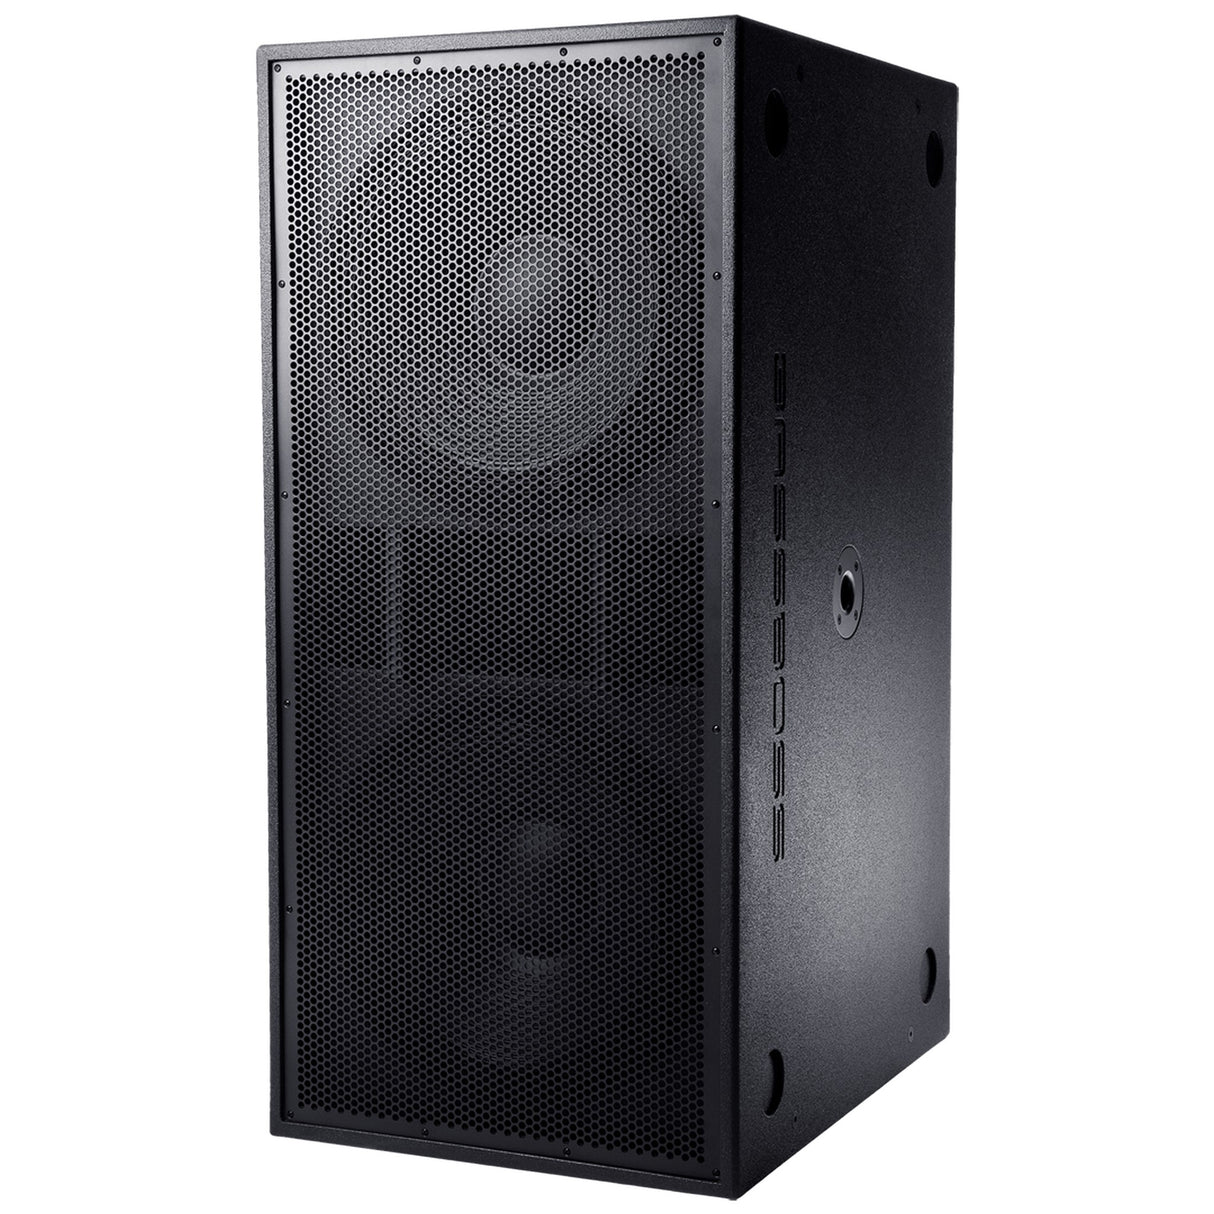 BASSBOSS SSP218-MK3 5000W Dual 18-Inch Vented Direct-Radiating Powered Subwoofer